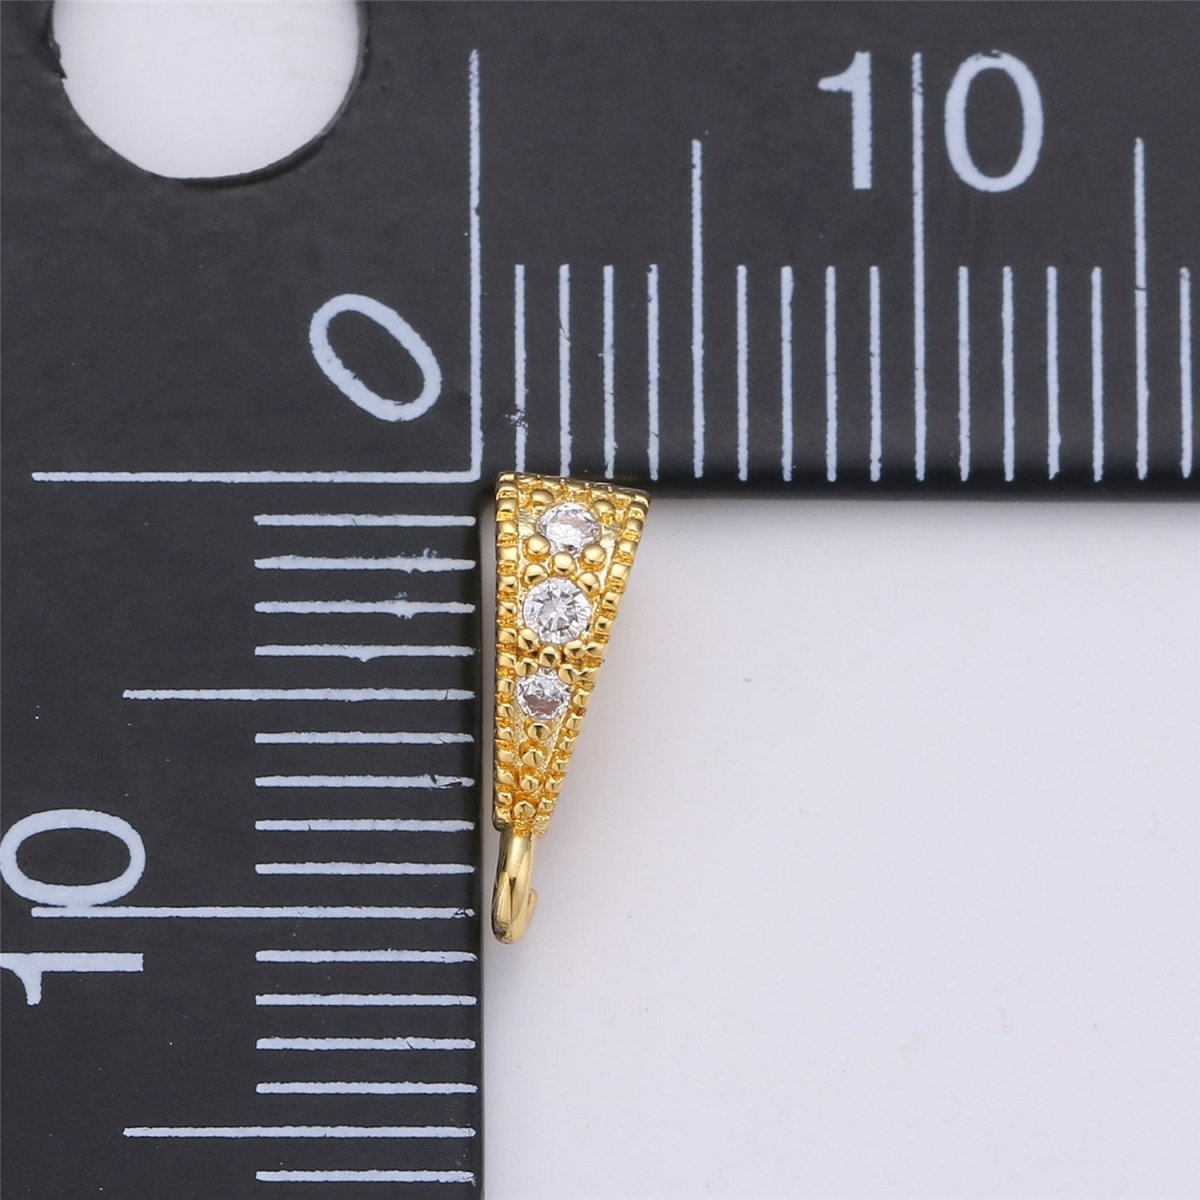 24k Gold Filled Pendant BAIL Clasp, Micro Pave CZ Charm Enhancer, Cubic Charm Bail Clasp, Removable Bail Clasp for Jewelry Making Supply,K-464 K-465 - DLUXCA